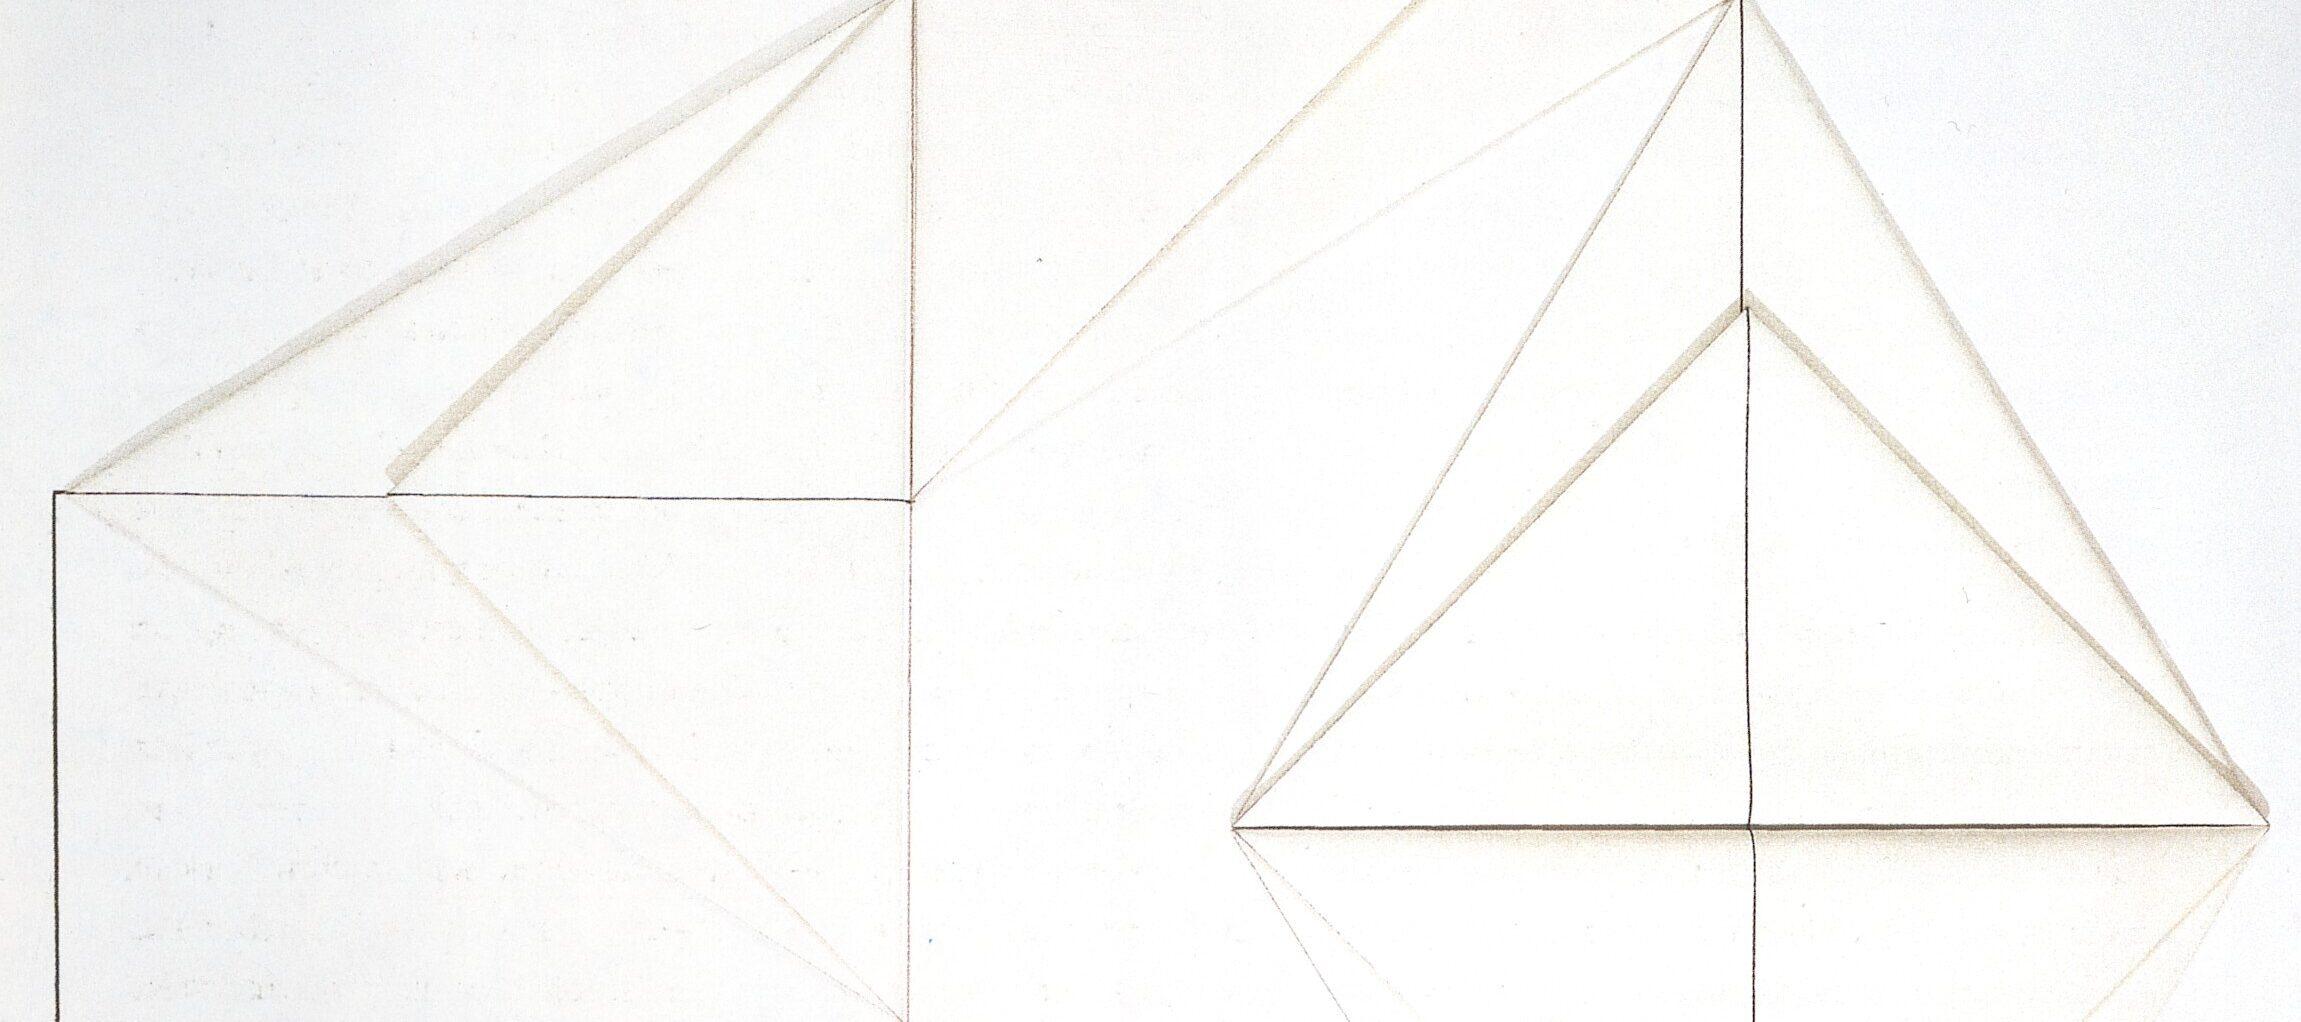 Six folded white triangles resembling origami form a large geometric shape on a white background. Connected by a continuous line that bisects their center, the corners of each triangle touch and encourage the eye to move in a circular fashion.